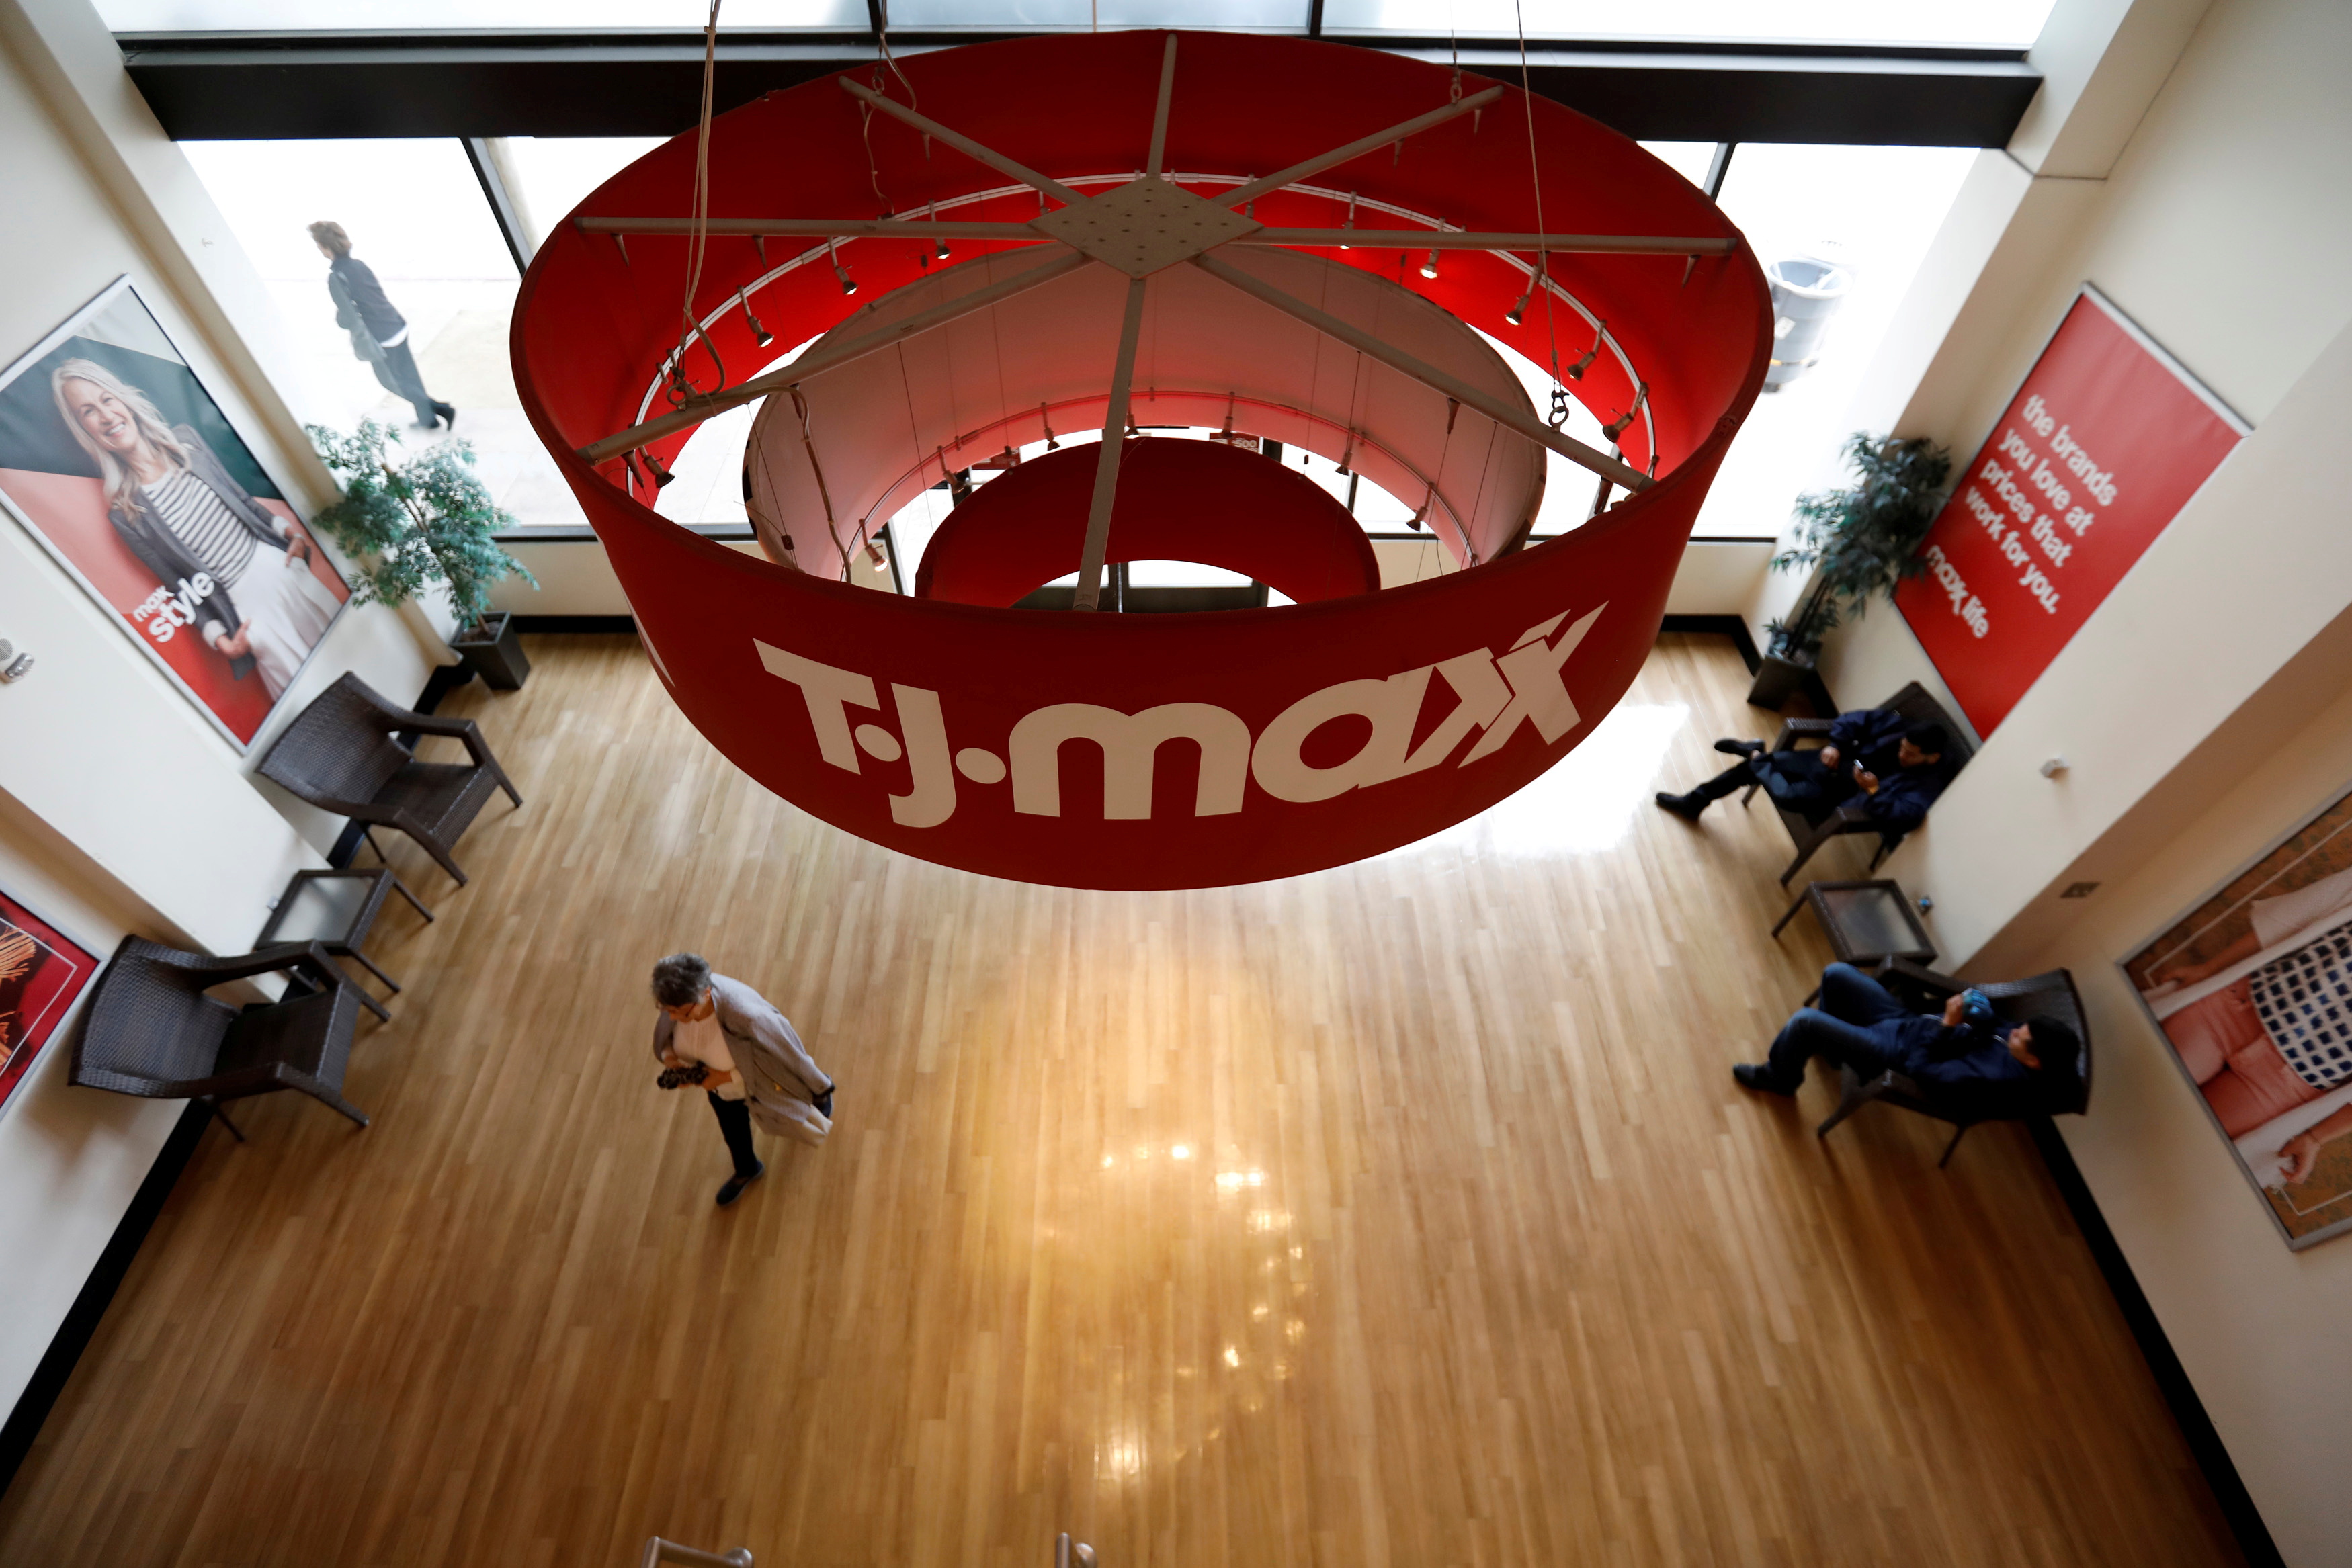 A T.J. Maxx store which is owned by TJX Cos Inc in Pasadena